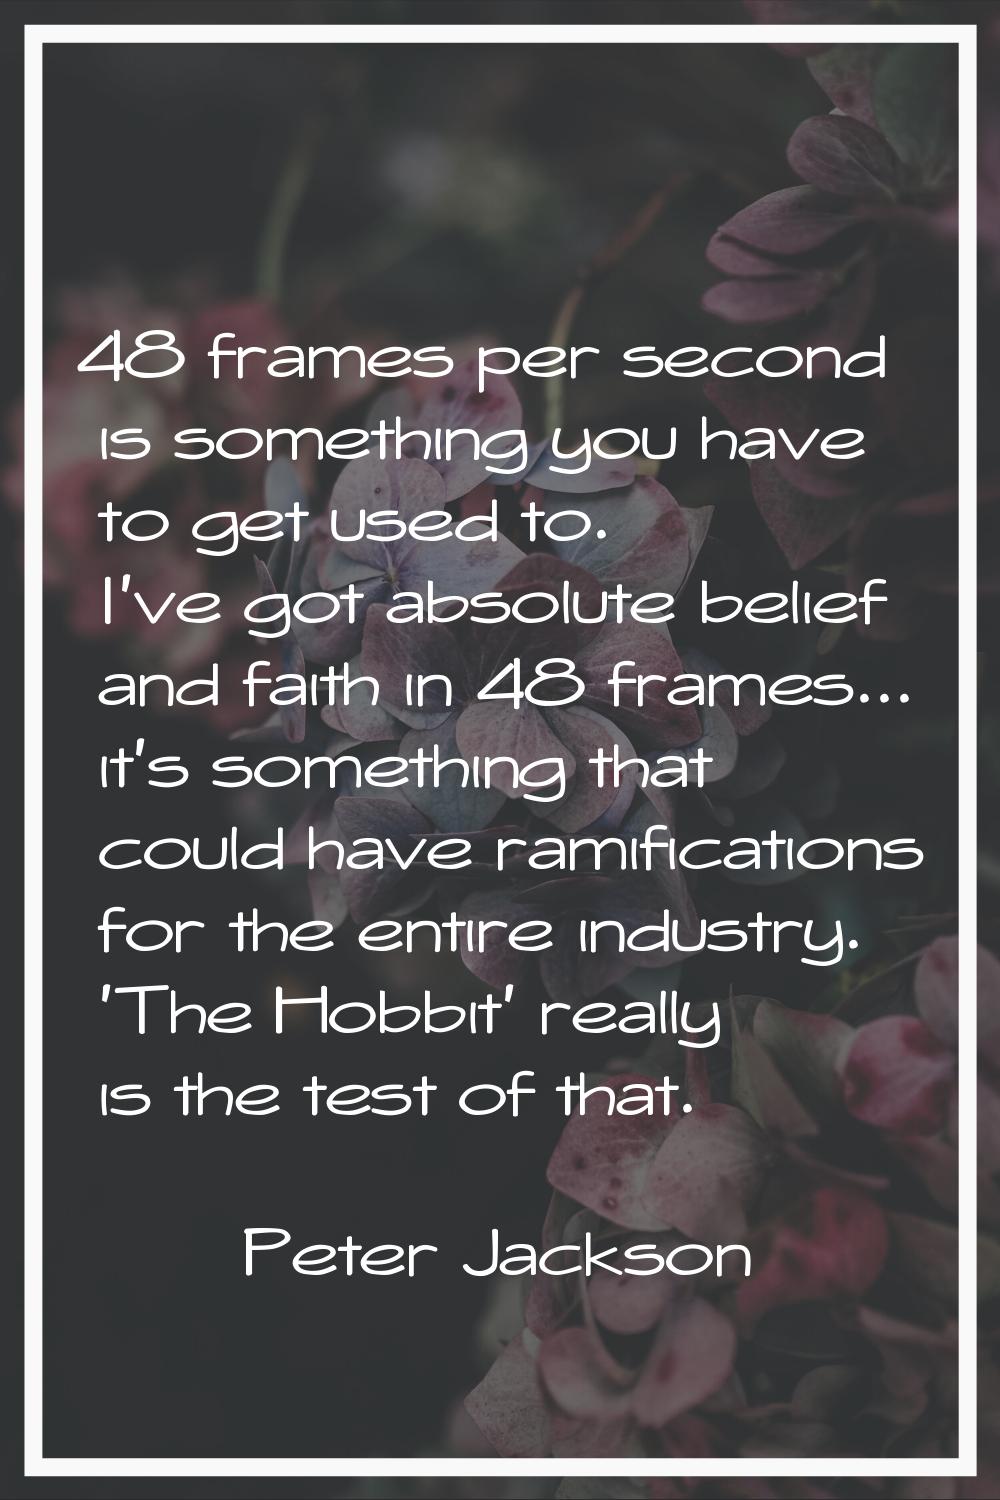 48 frames per second is something you have to get used to. I've got absolute belief and faith in 48